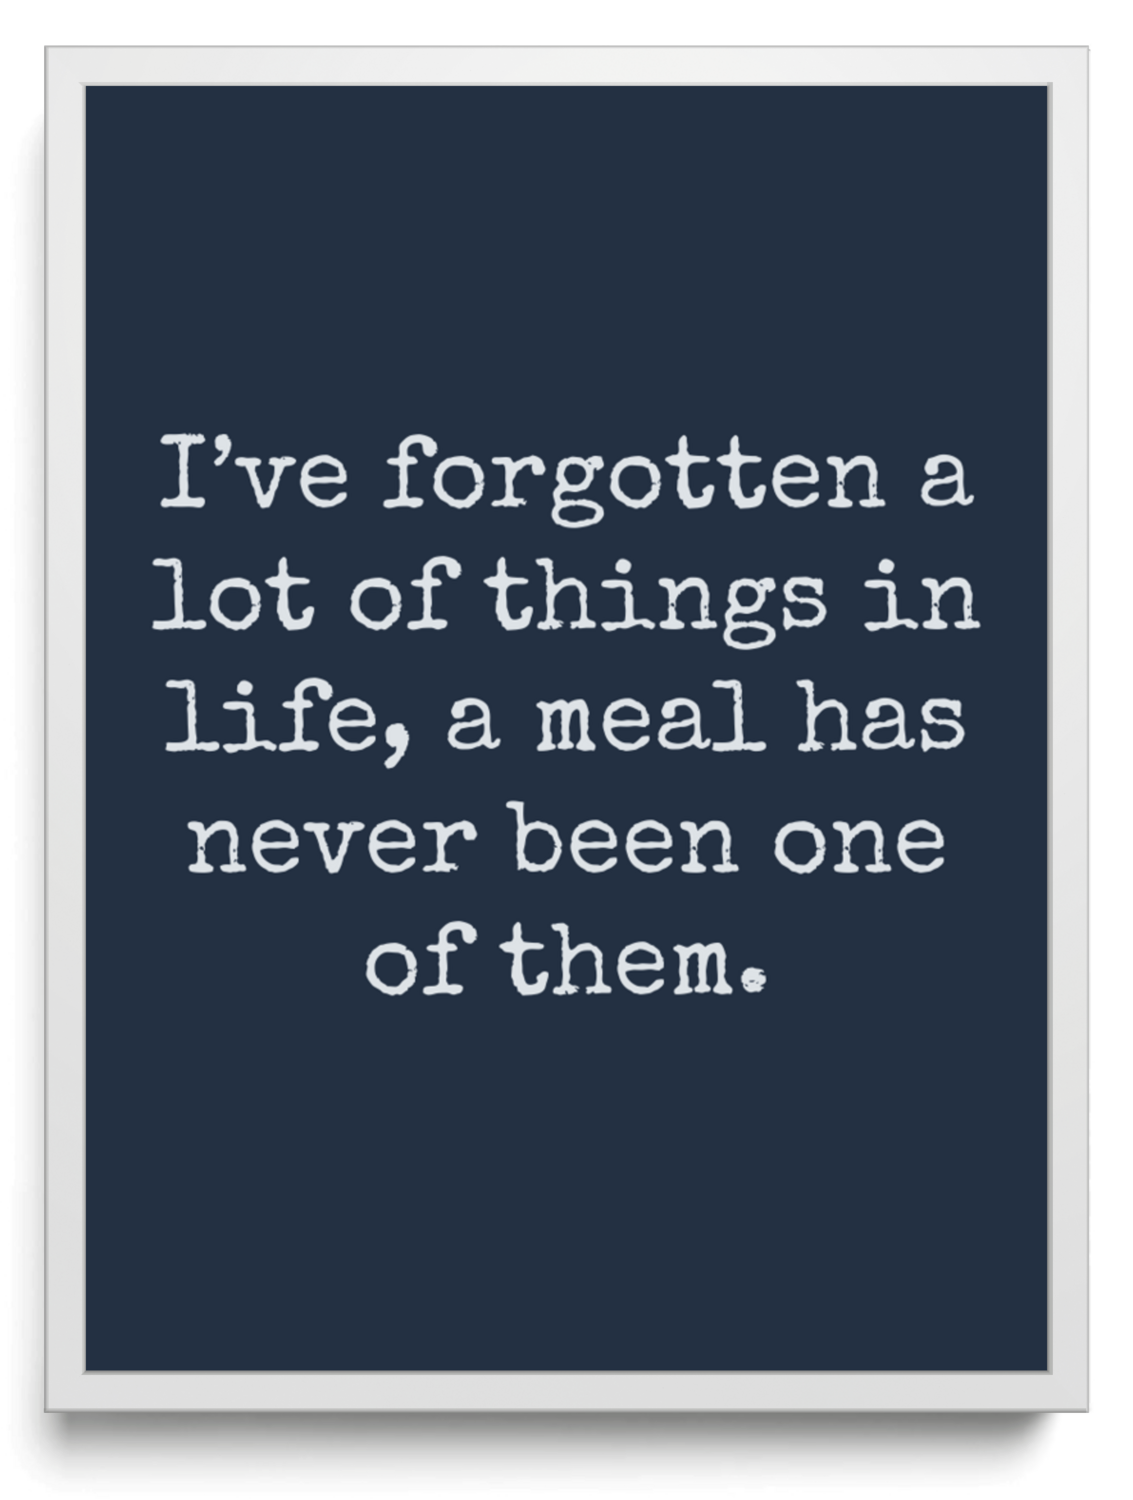 Ive forgotten a lot of things in life a meal has never been one of them framed typographic print